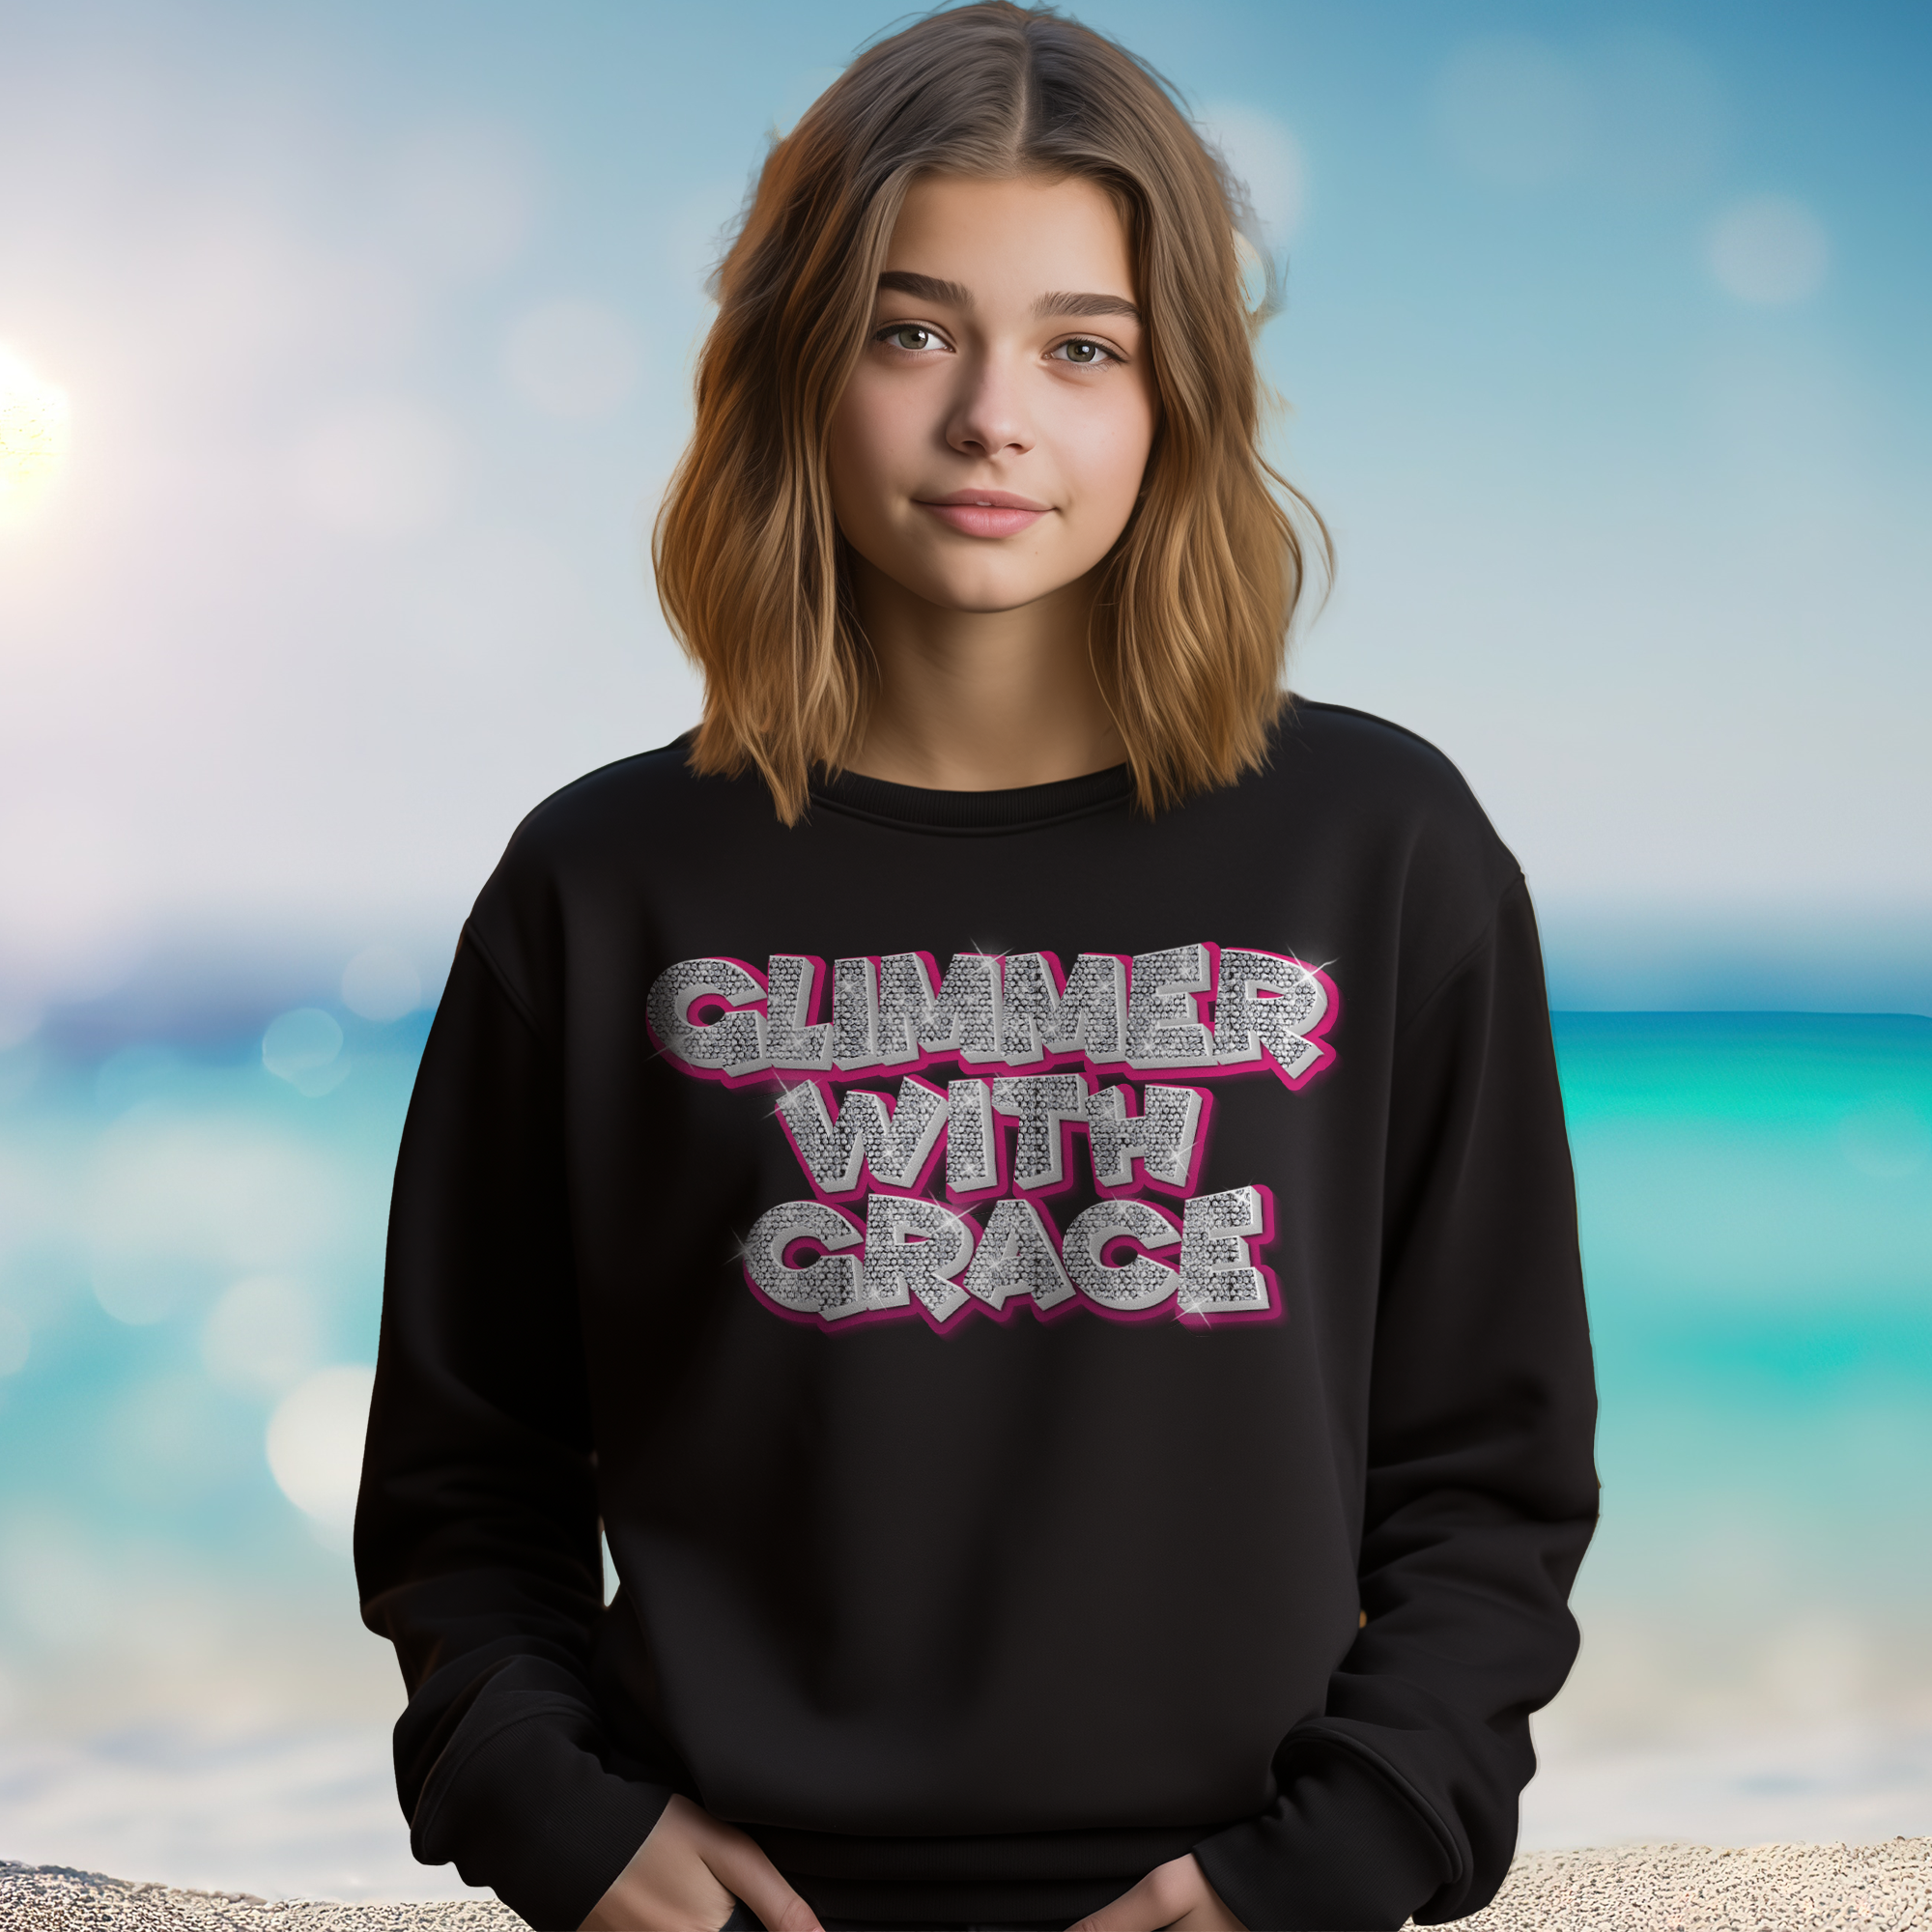 Glimmer with Grace Youth Crewneck Sweatshirt Color: White Size: XS Jesus Passion Apparel